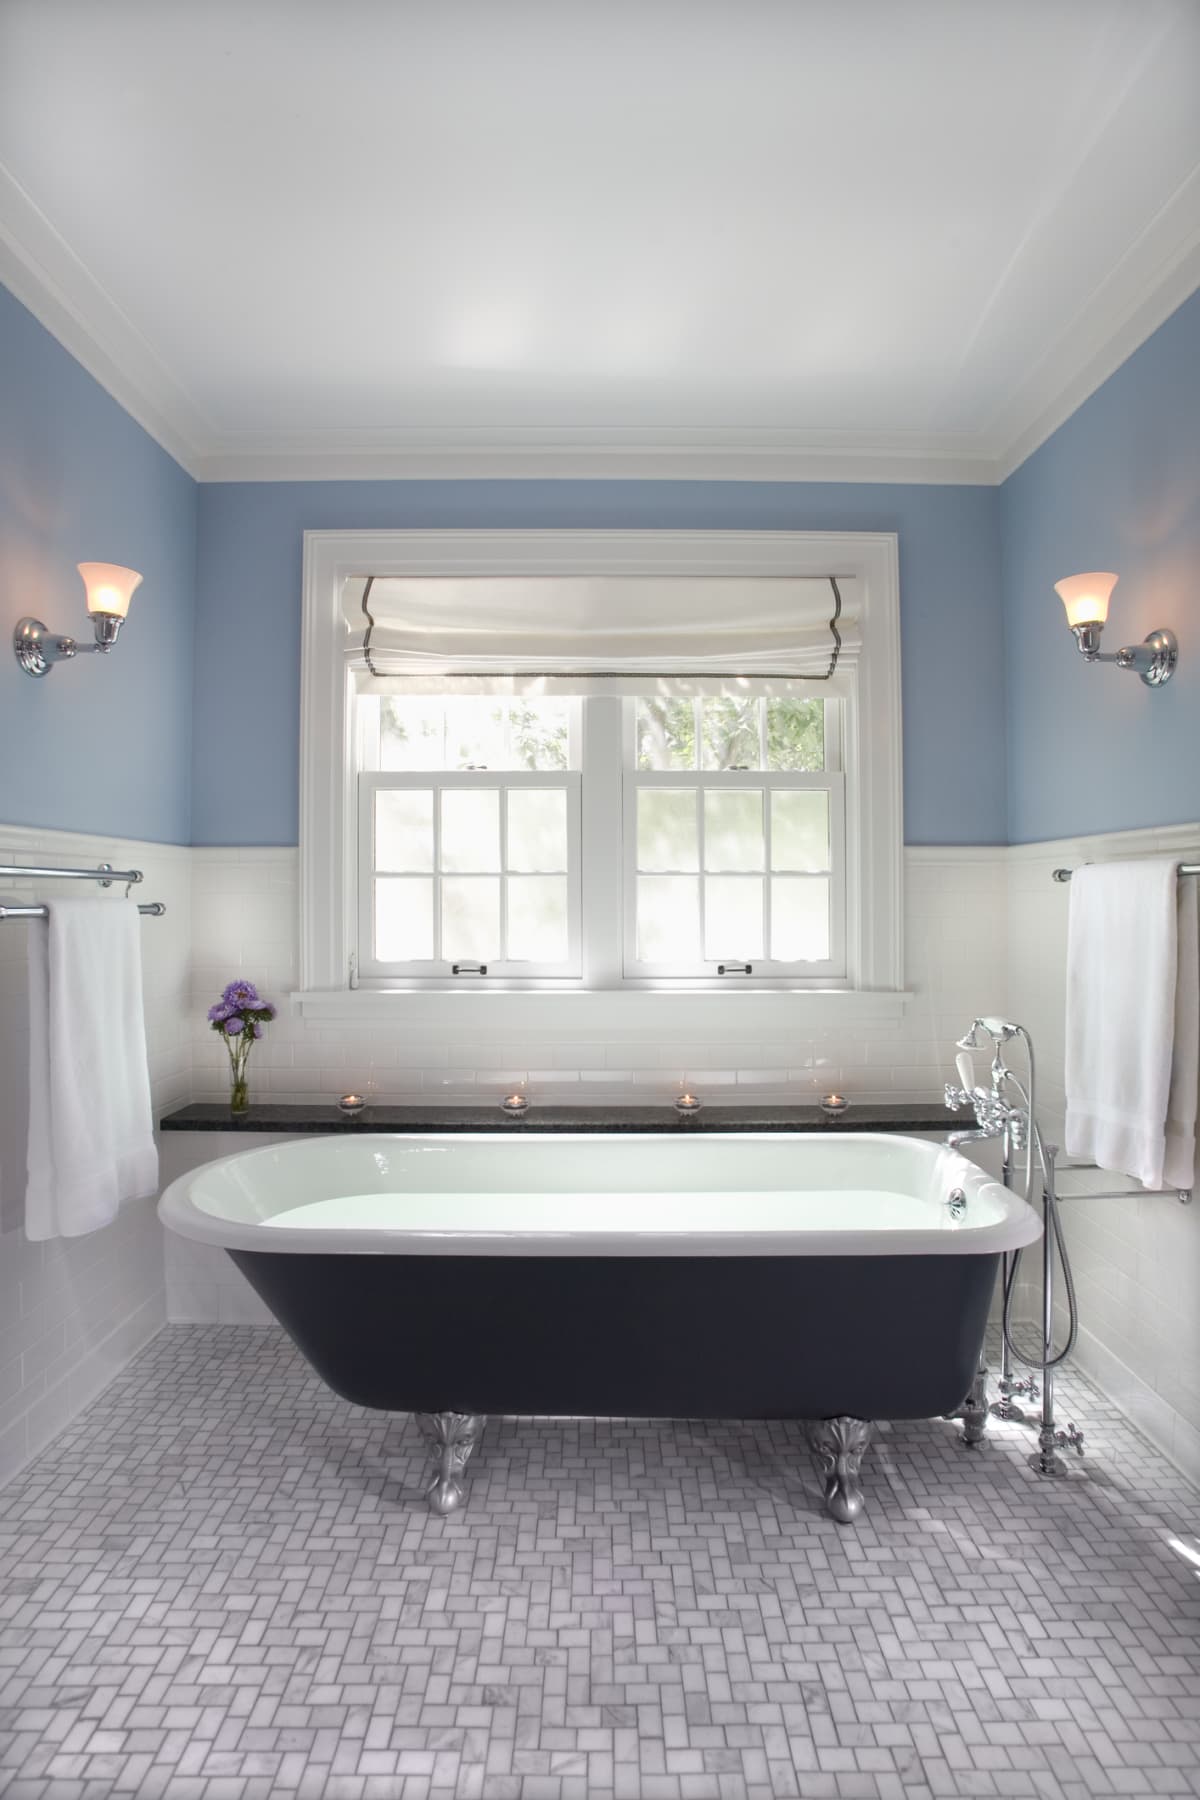 A bathroom with blue and white walls with a raised pedestal tub